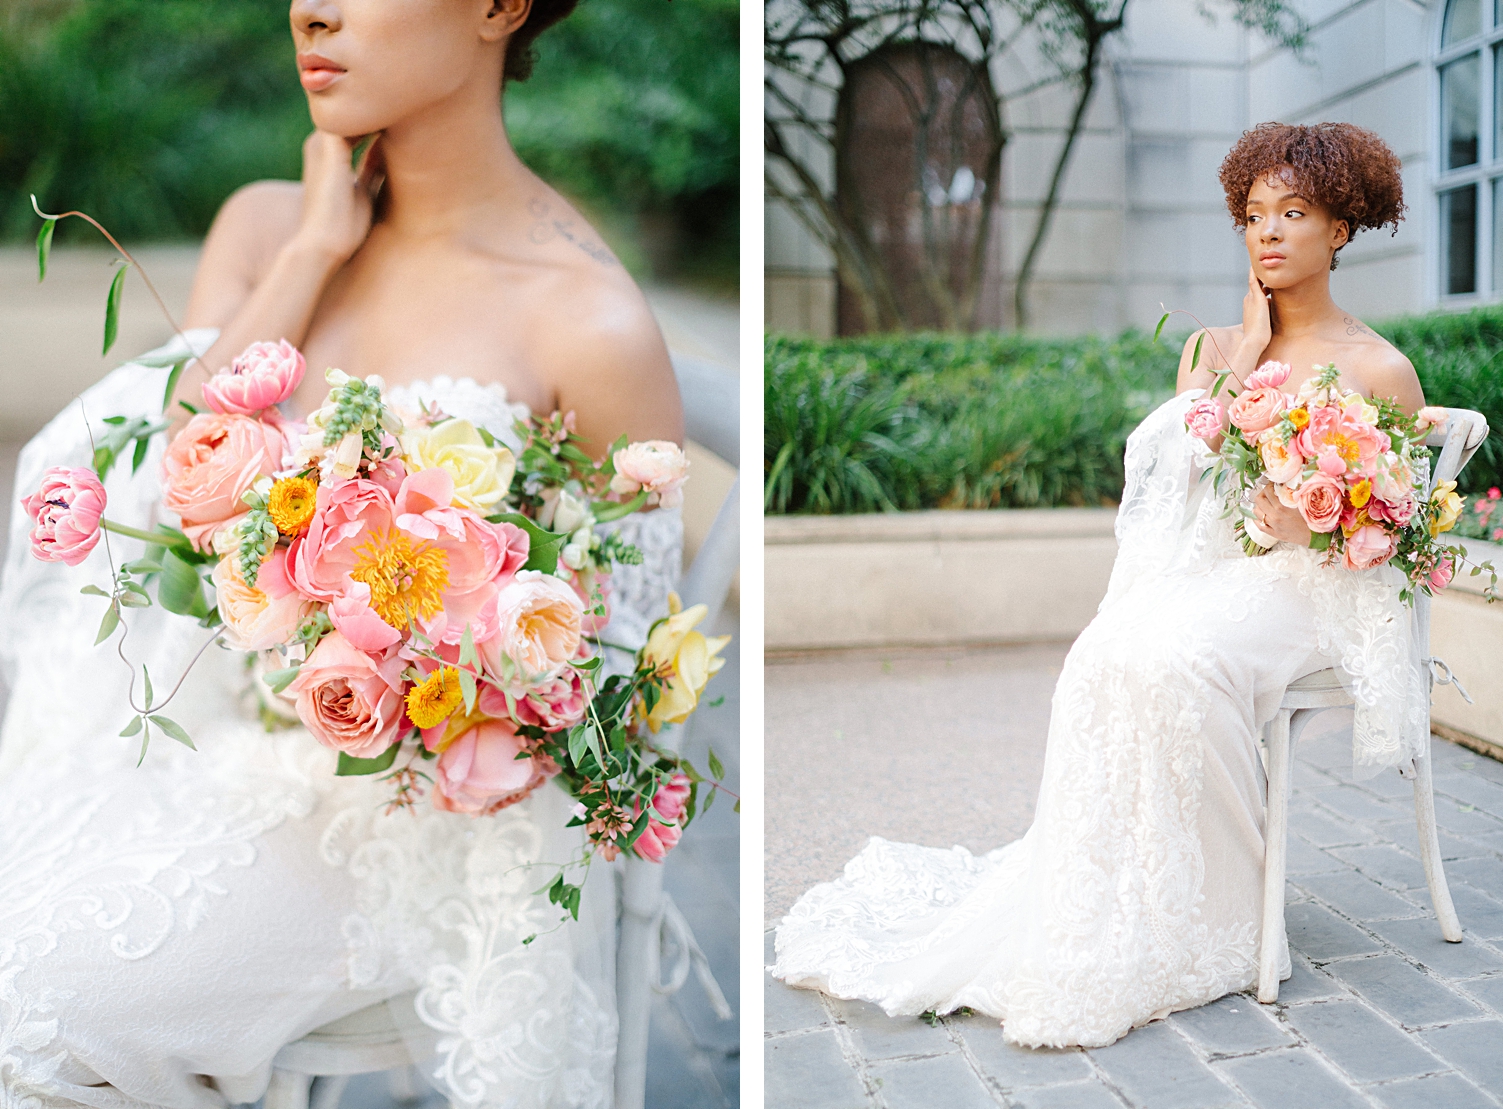 Bride in lace boho wedding dress and pink bouquet sitting in white chair 